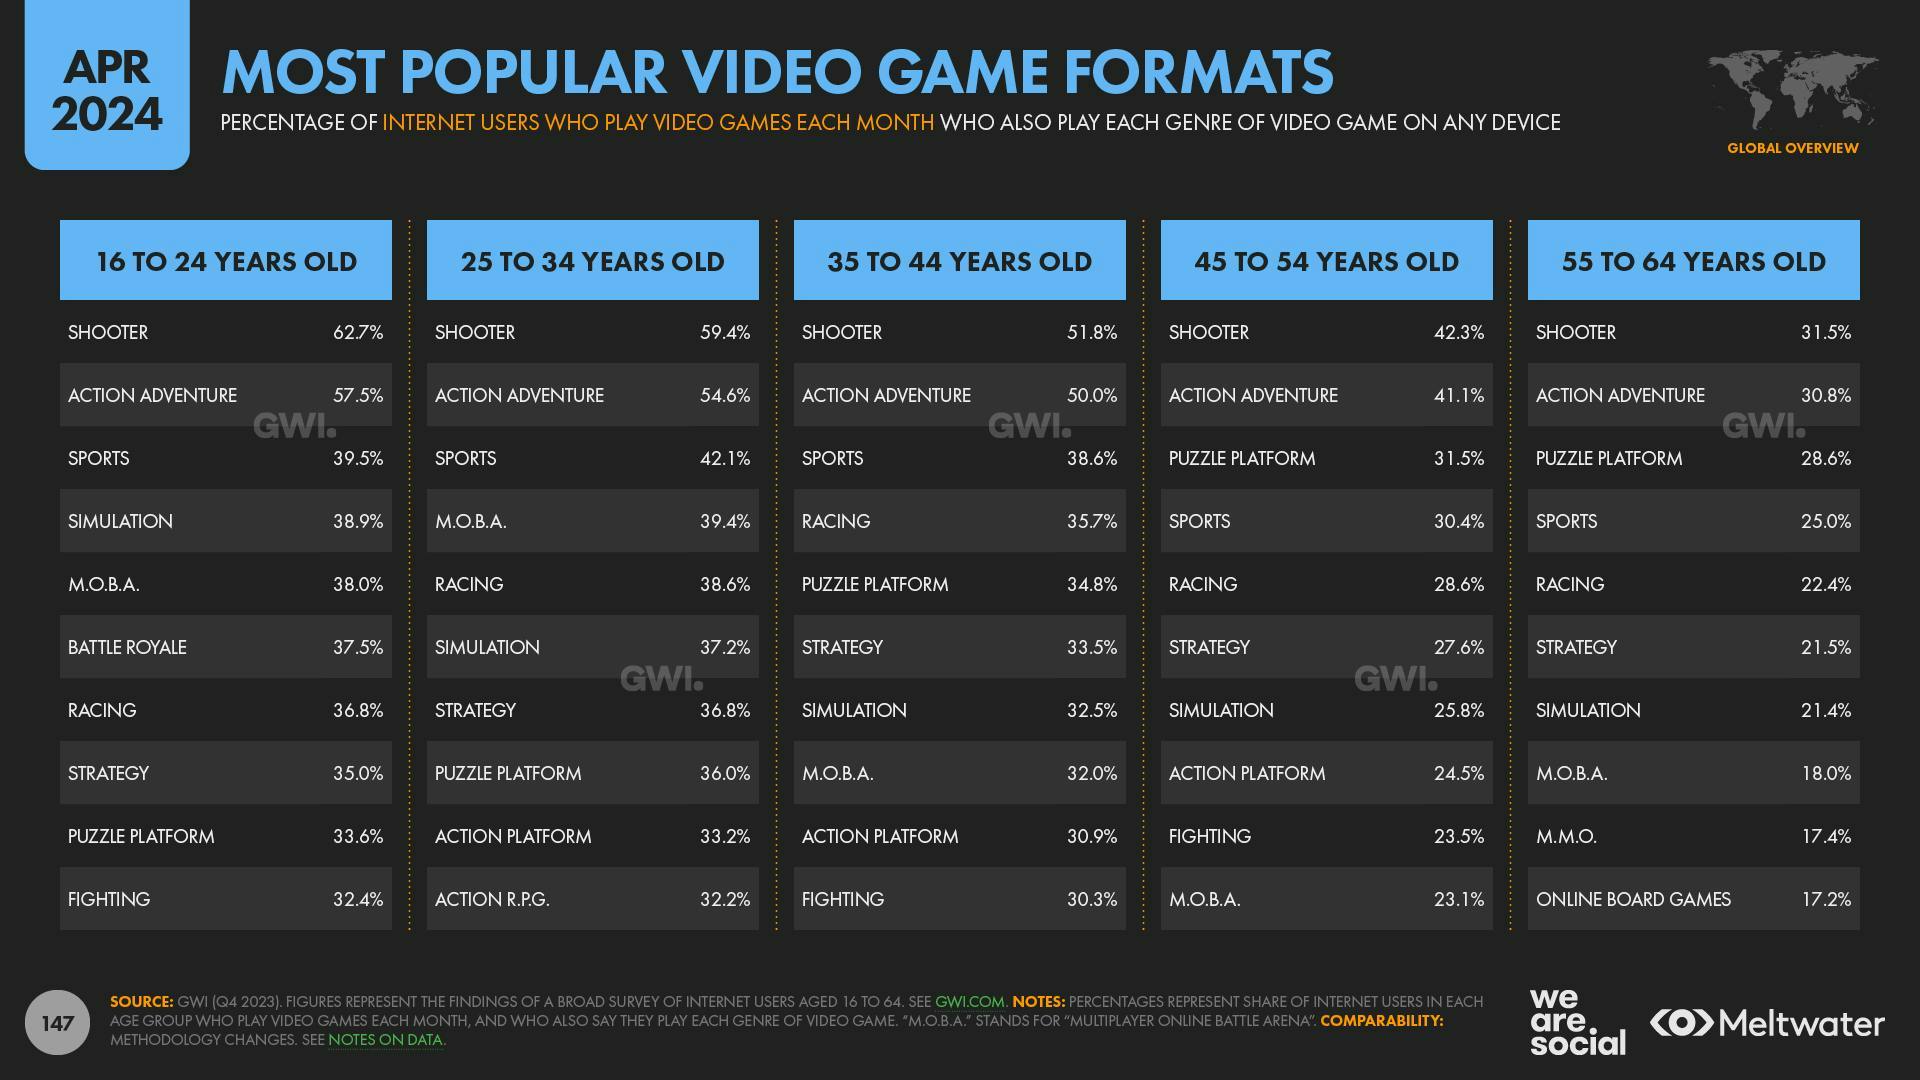 Most popular video game formats